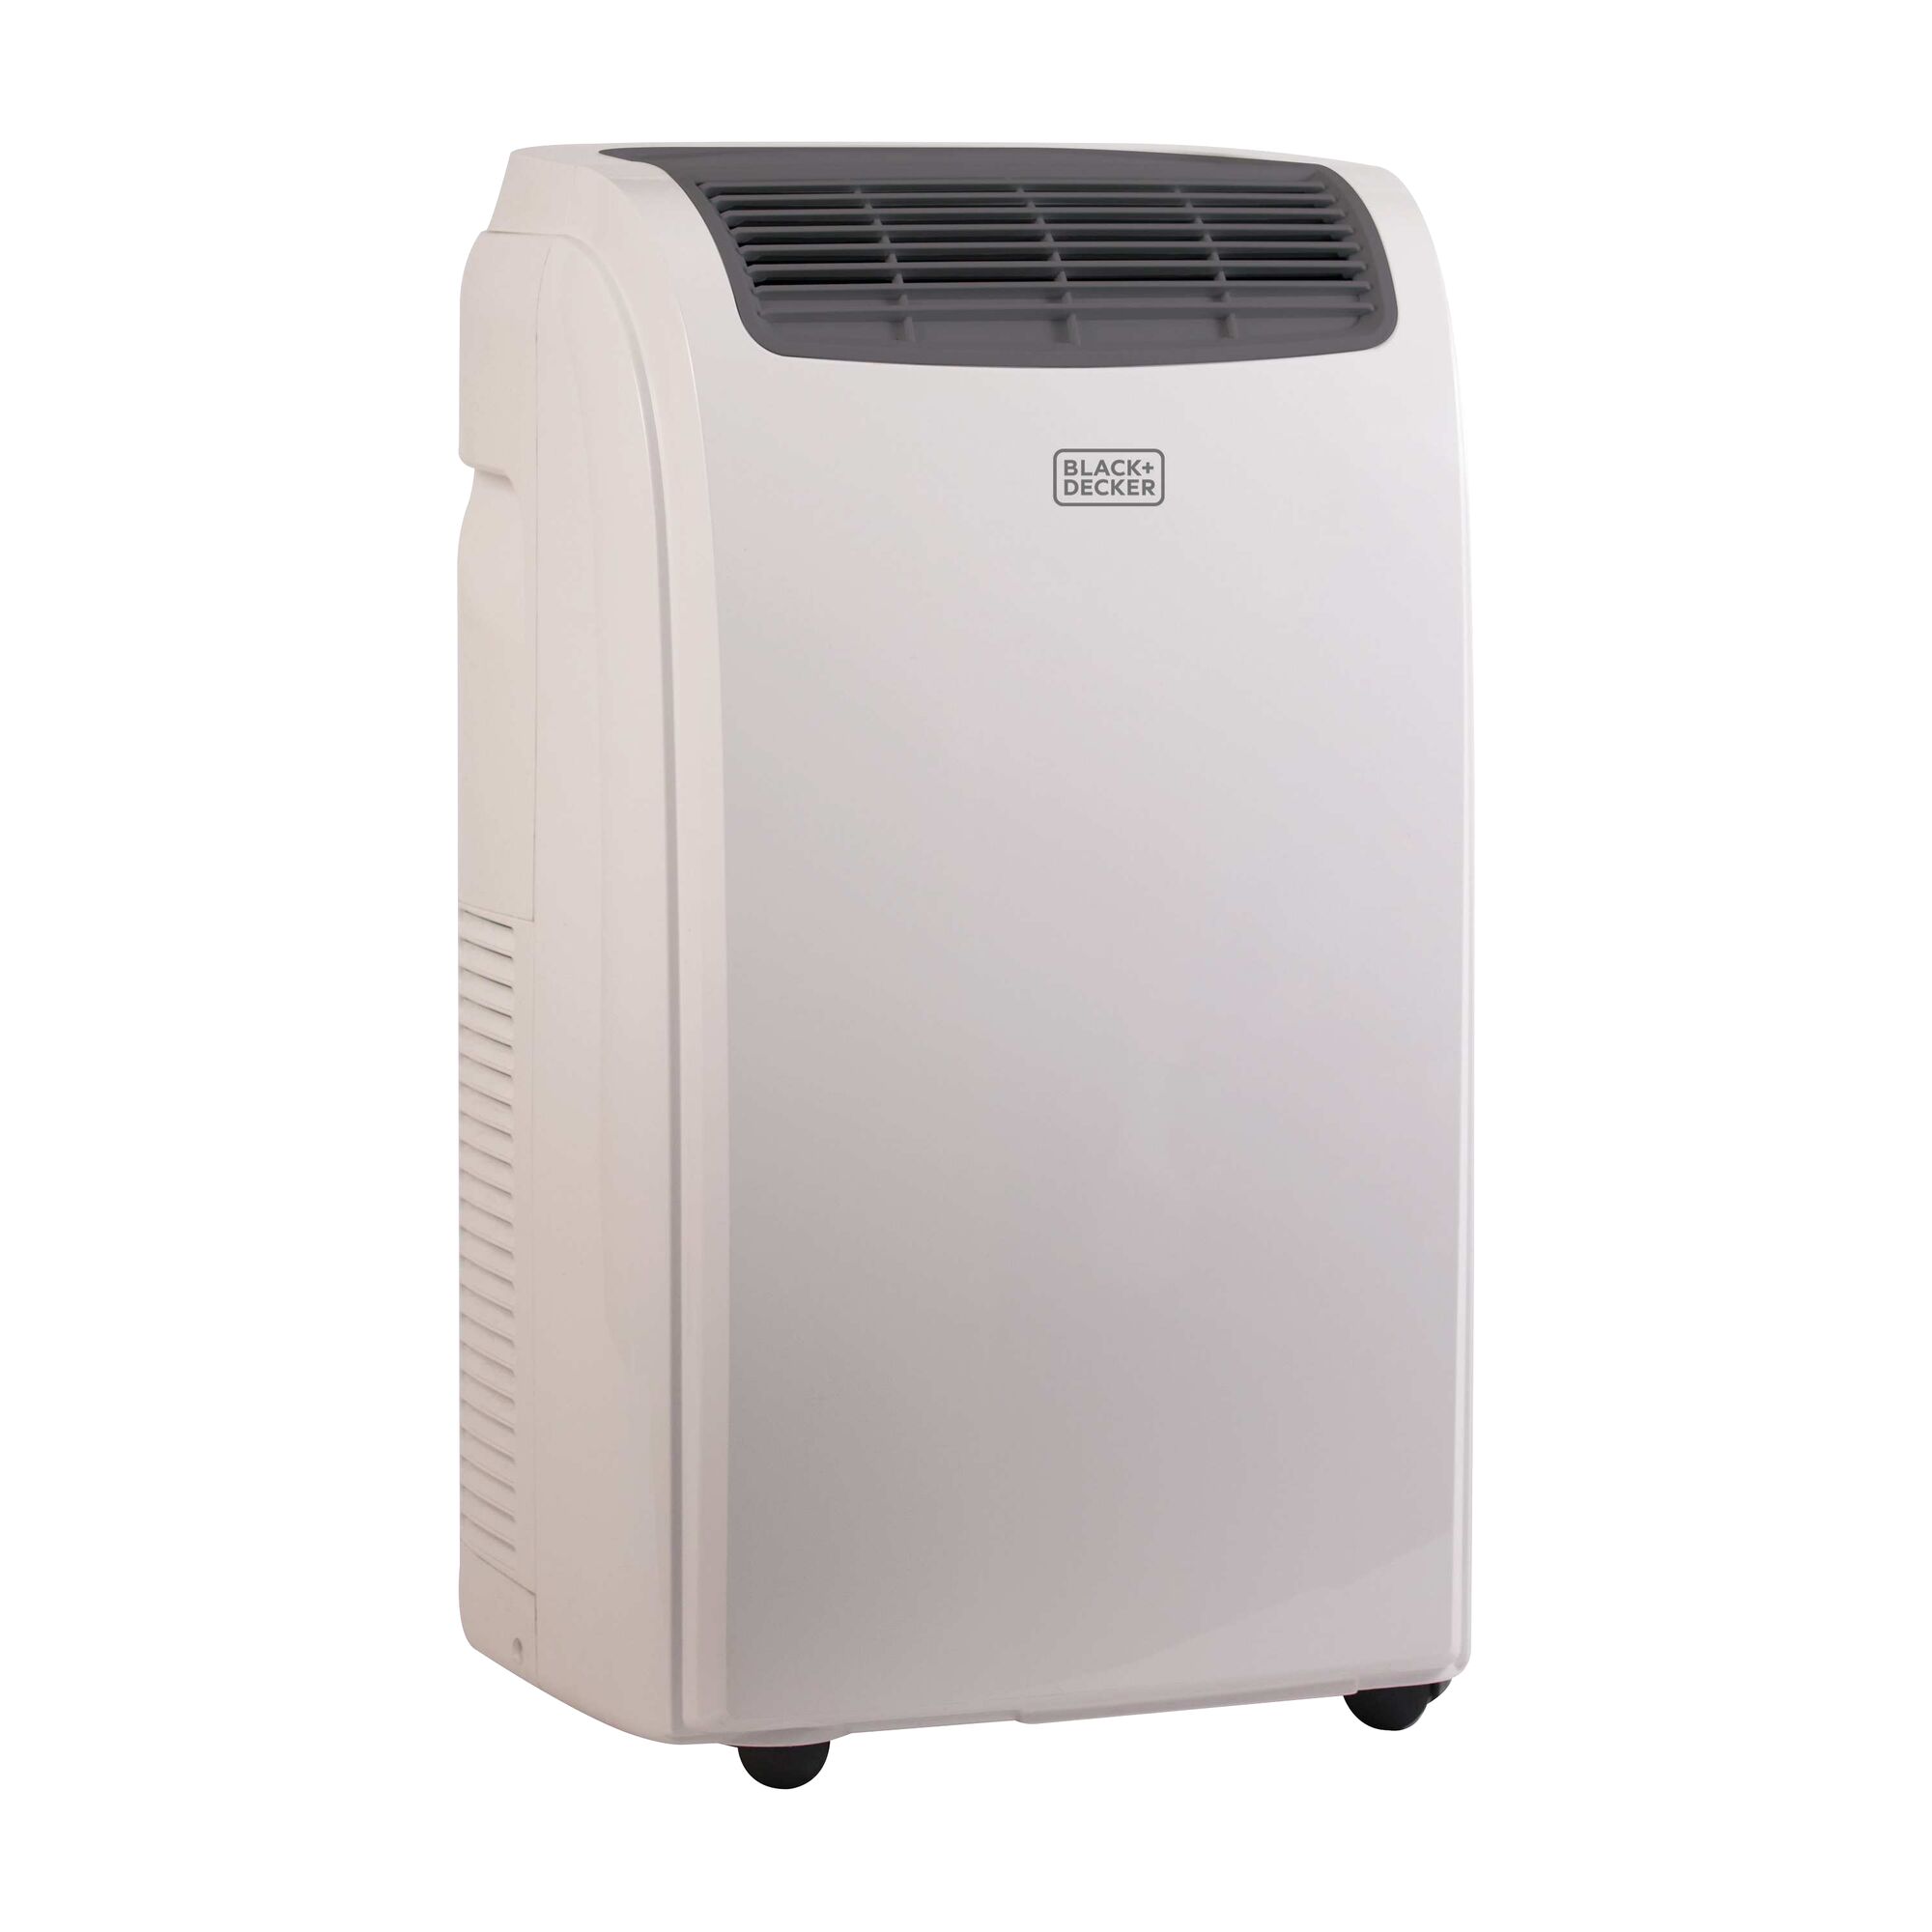 Profile of 4000 British Thermal Units Portable Air Conditioner with Remote Control.